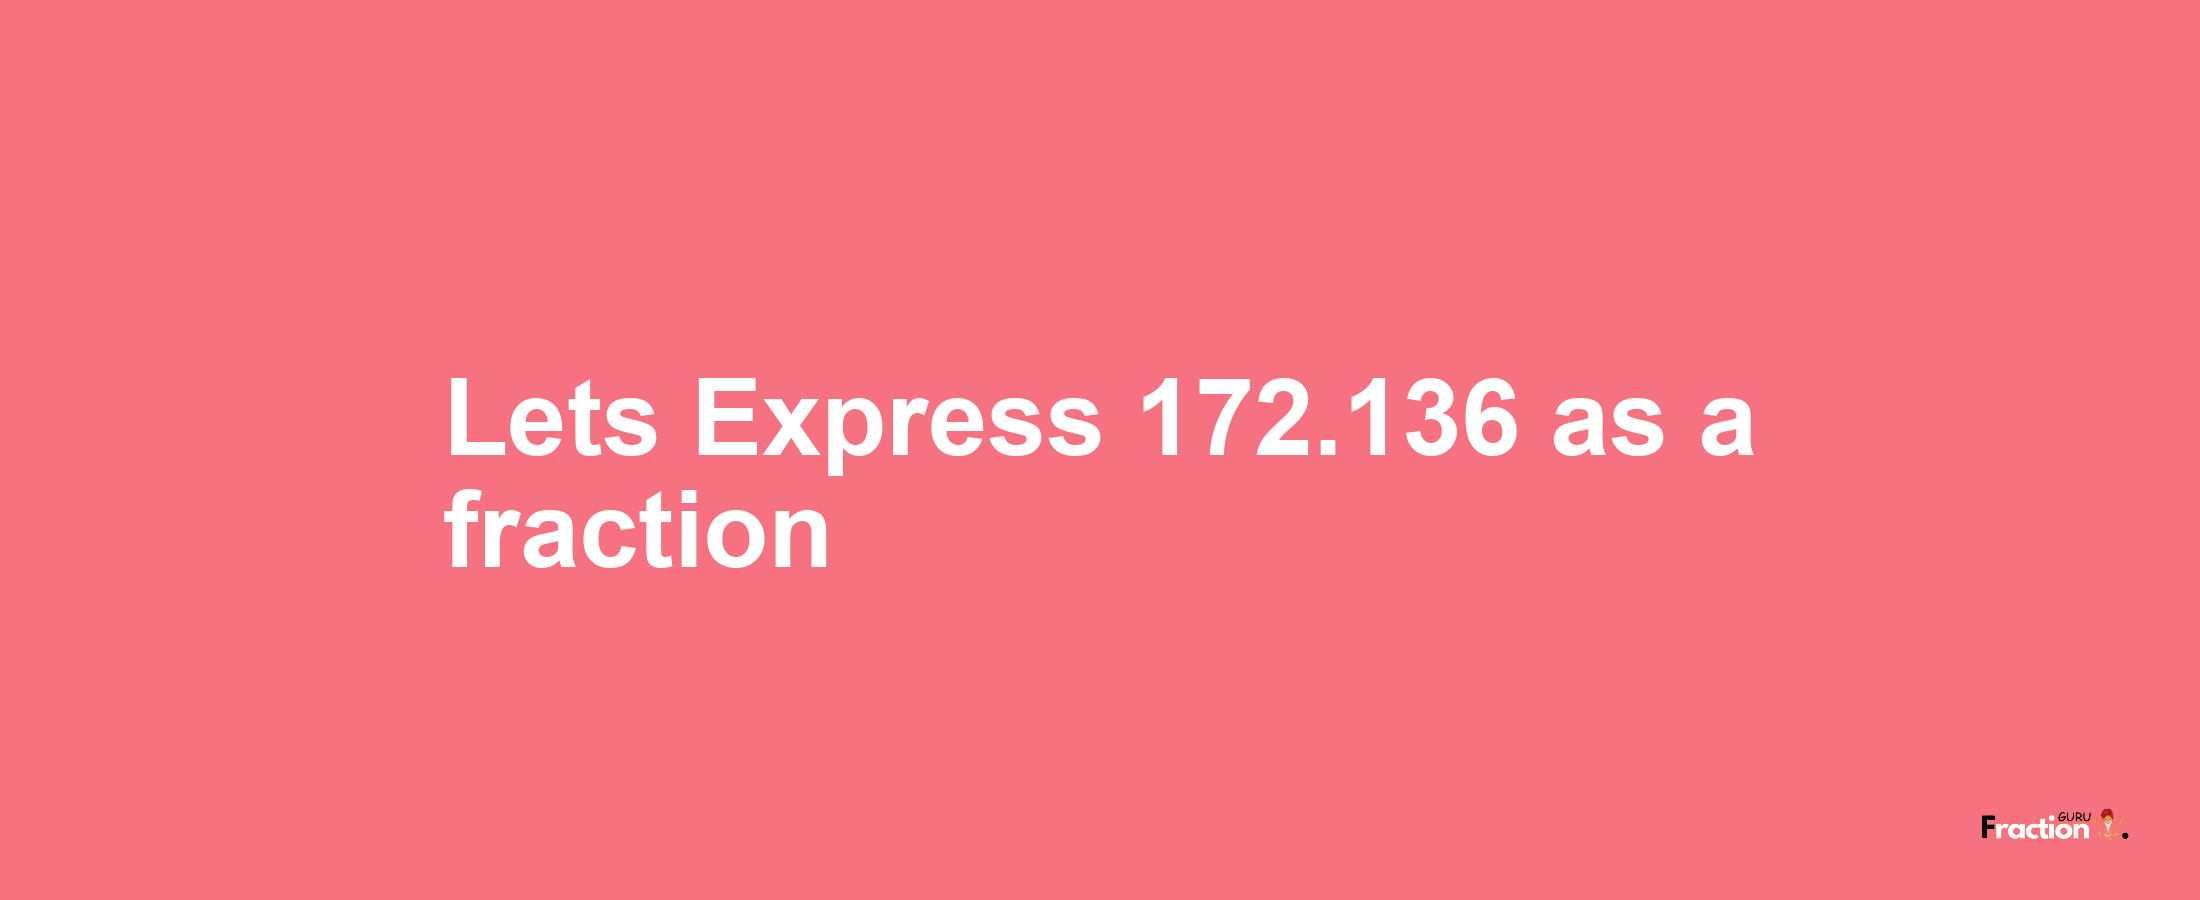 Lets Express 172.136 as afraction